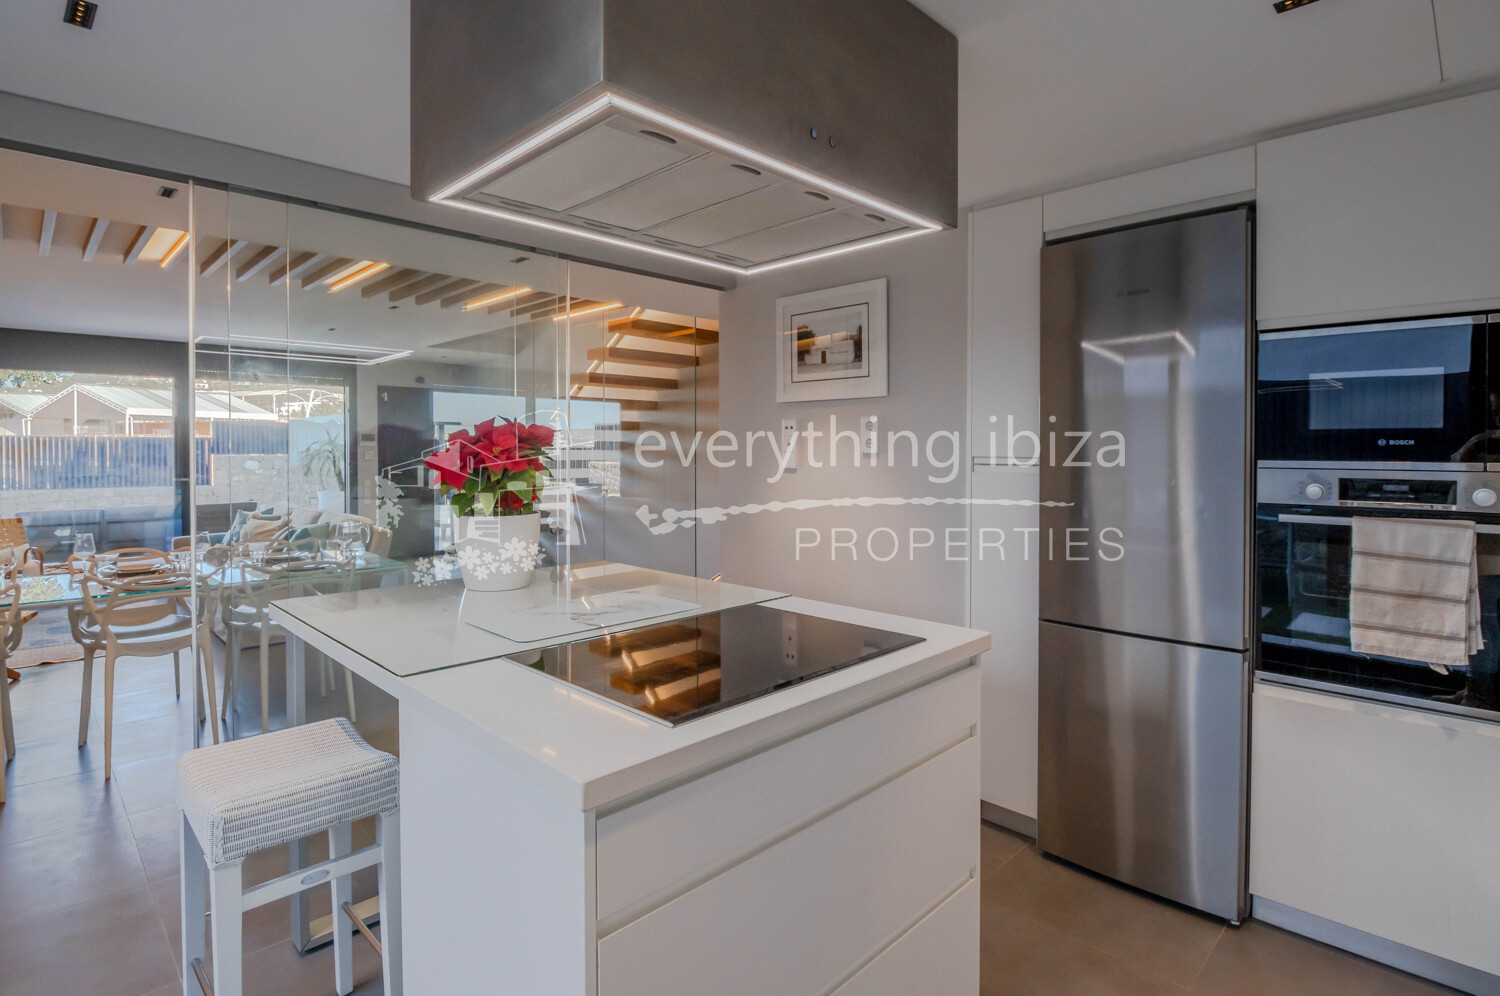 Stylish New Semi-Detached Villa with Pool Close to Ibiza Marina and Talamanca Beach, ref. 1653, for sale in Ibiza by everything ibiza Properties